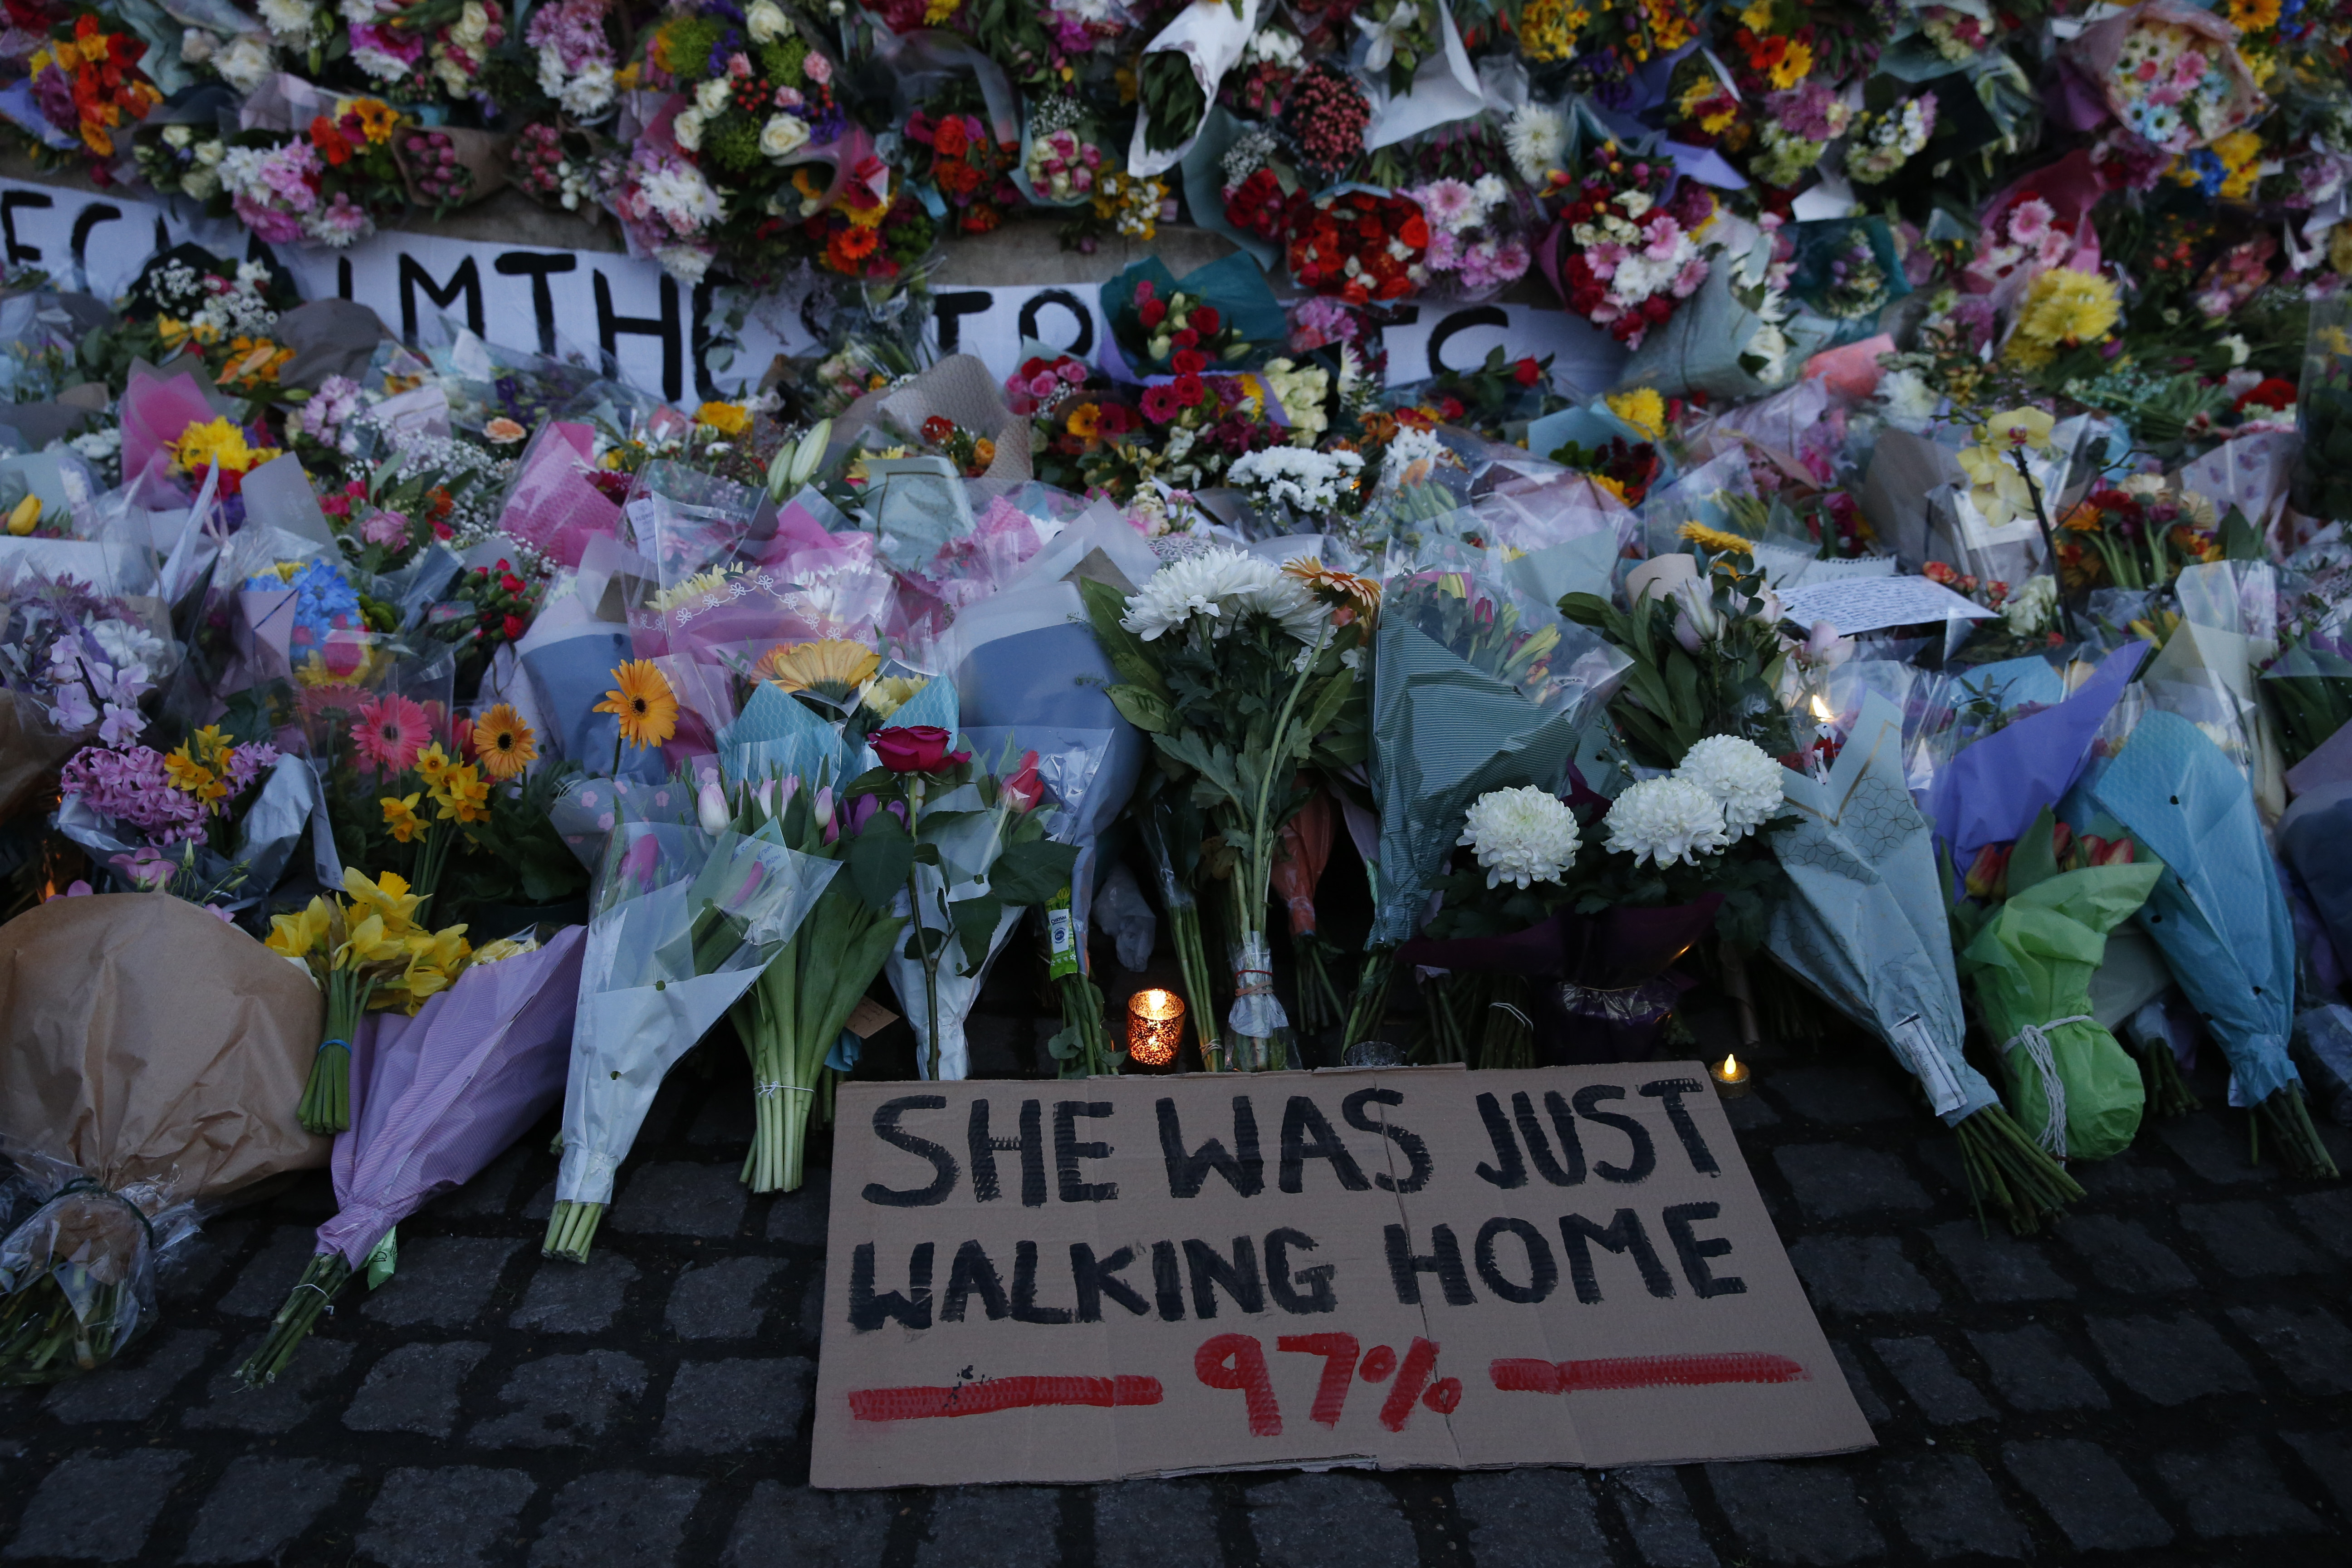 A sign saying "SHE WAS JUST WALKING HOME 97%" with flowers and candles around photo.